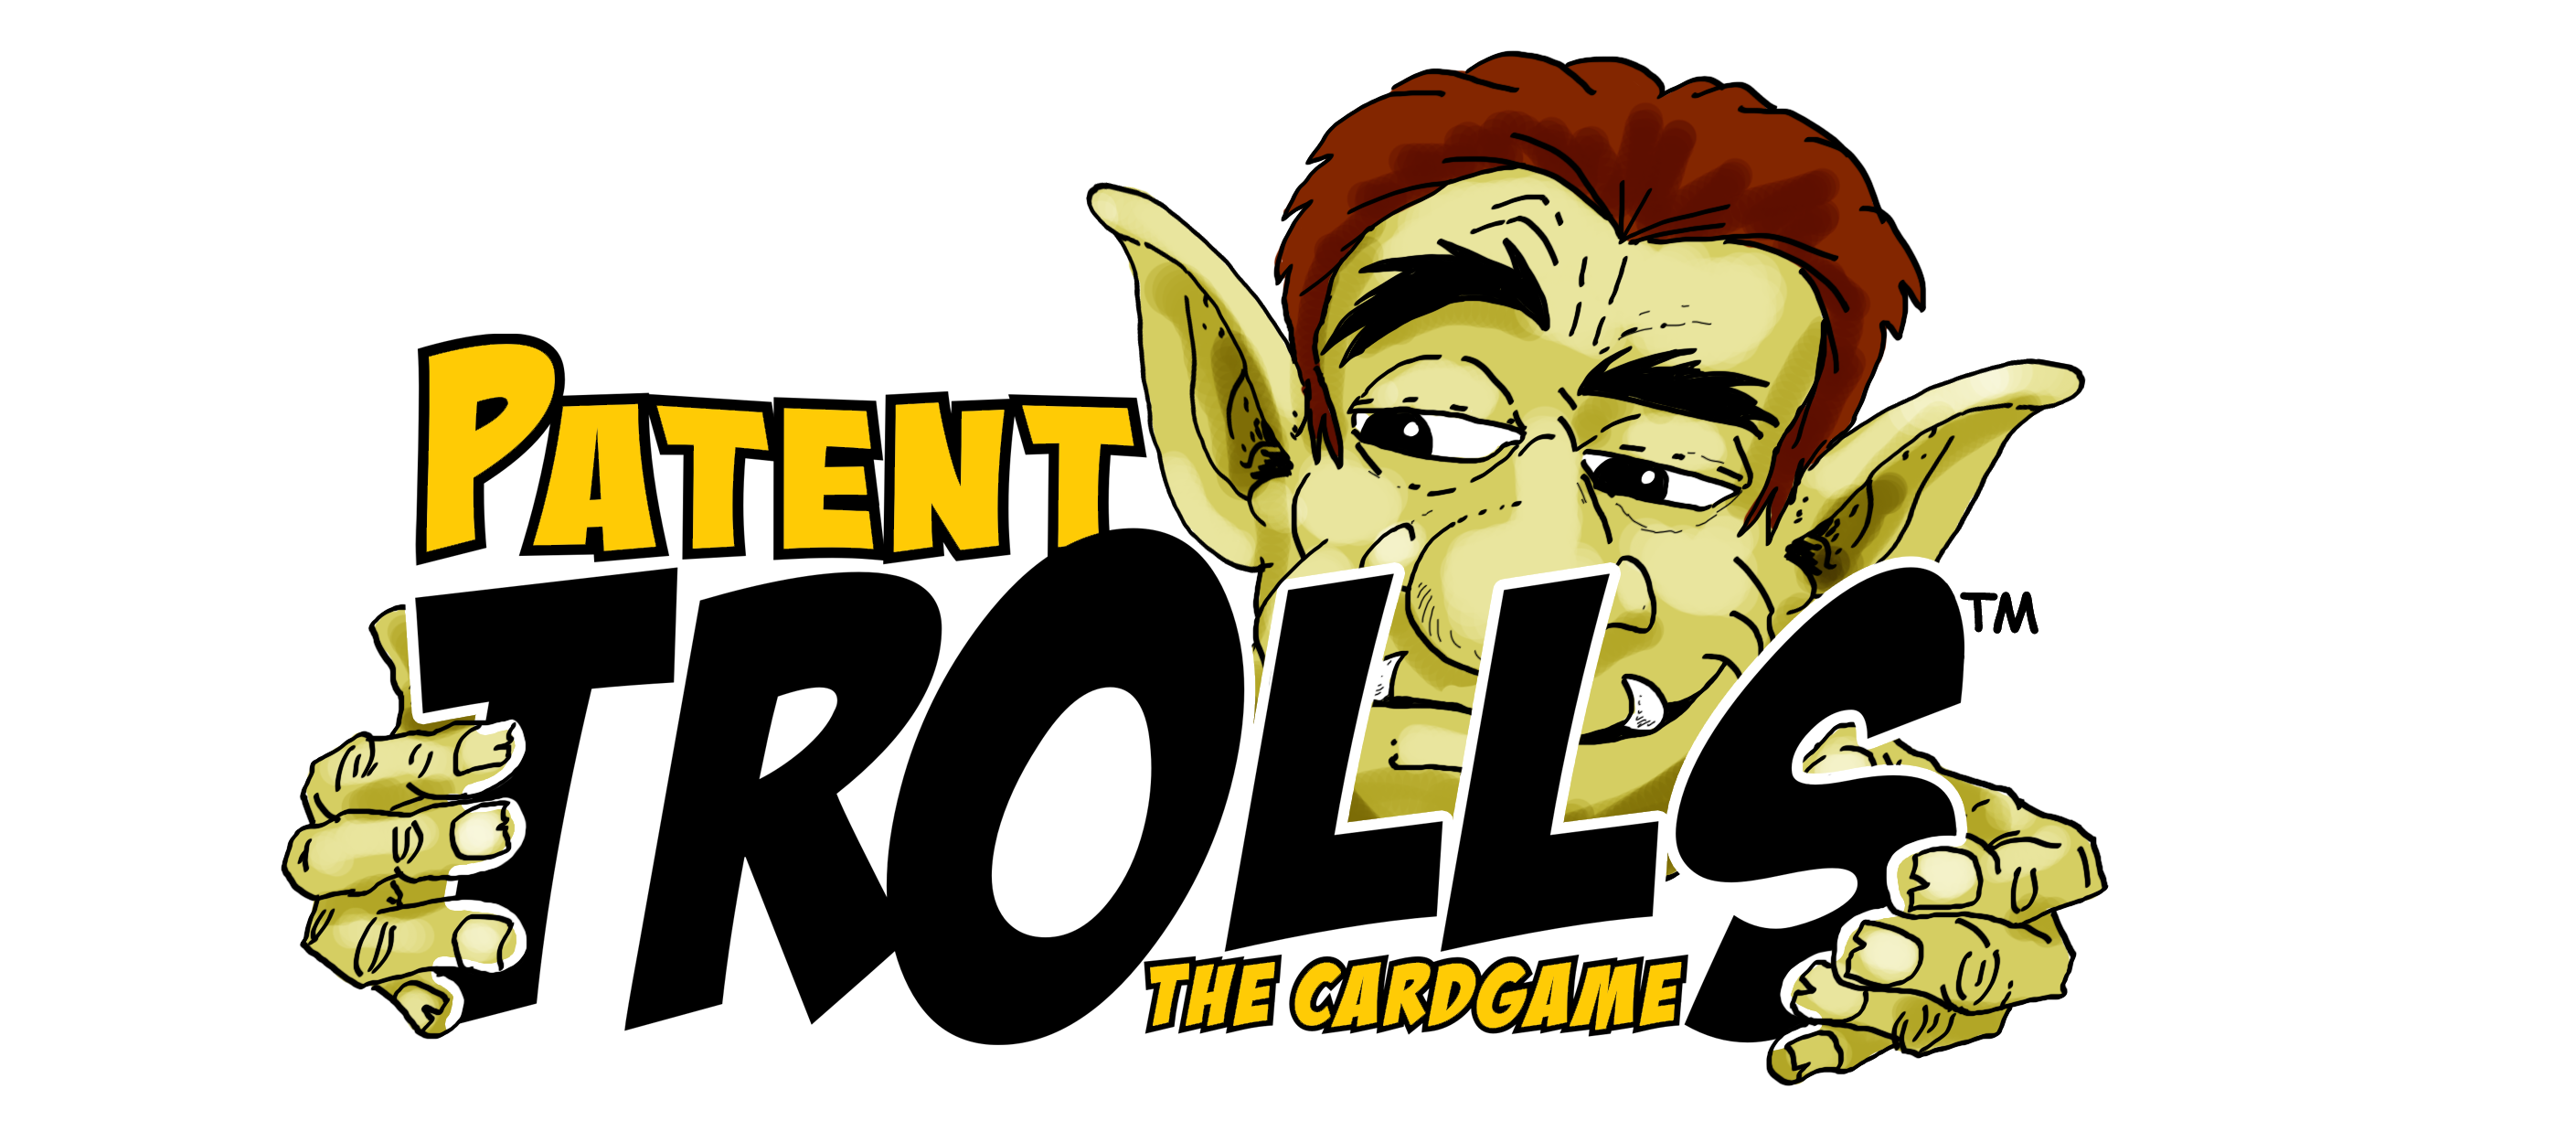 Wip patent trolls the. Rules clipart game rule